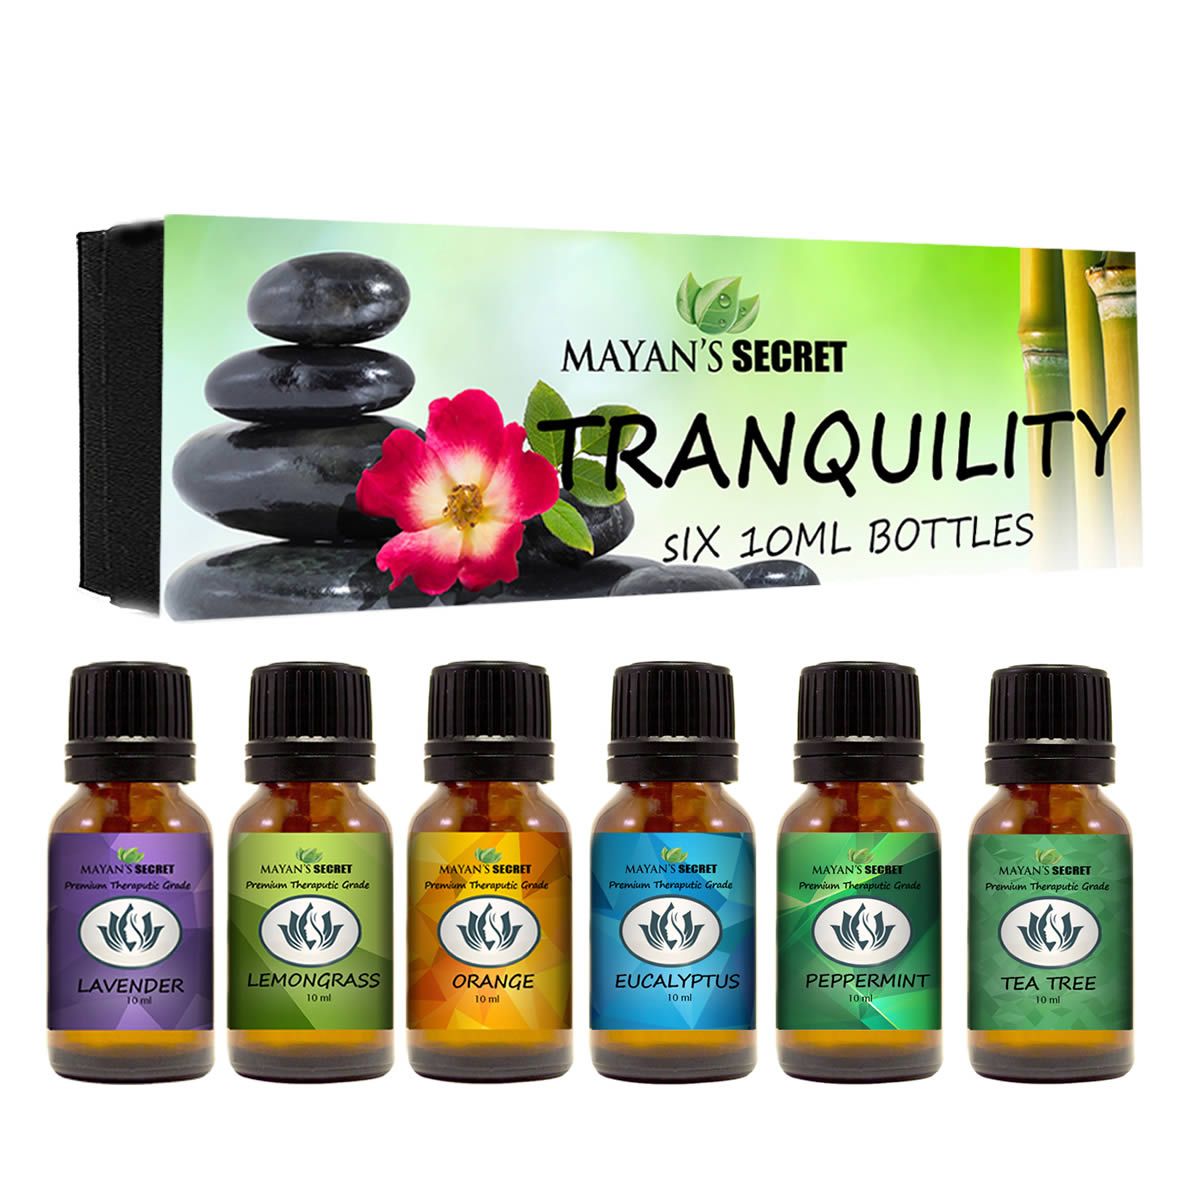 Premium Grade Essential Oils-Tranquility- Gift Set 6/10ml Pure Essential Oils for Diffuser, Humidifier, Massage, Aromatherapy, Skin & Hair Care